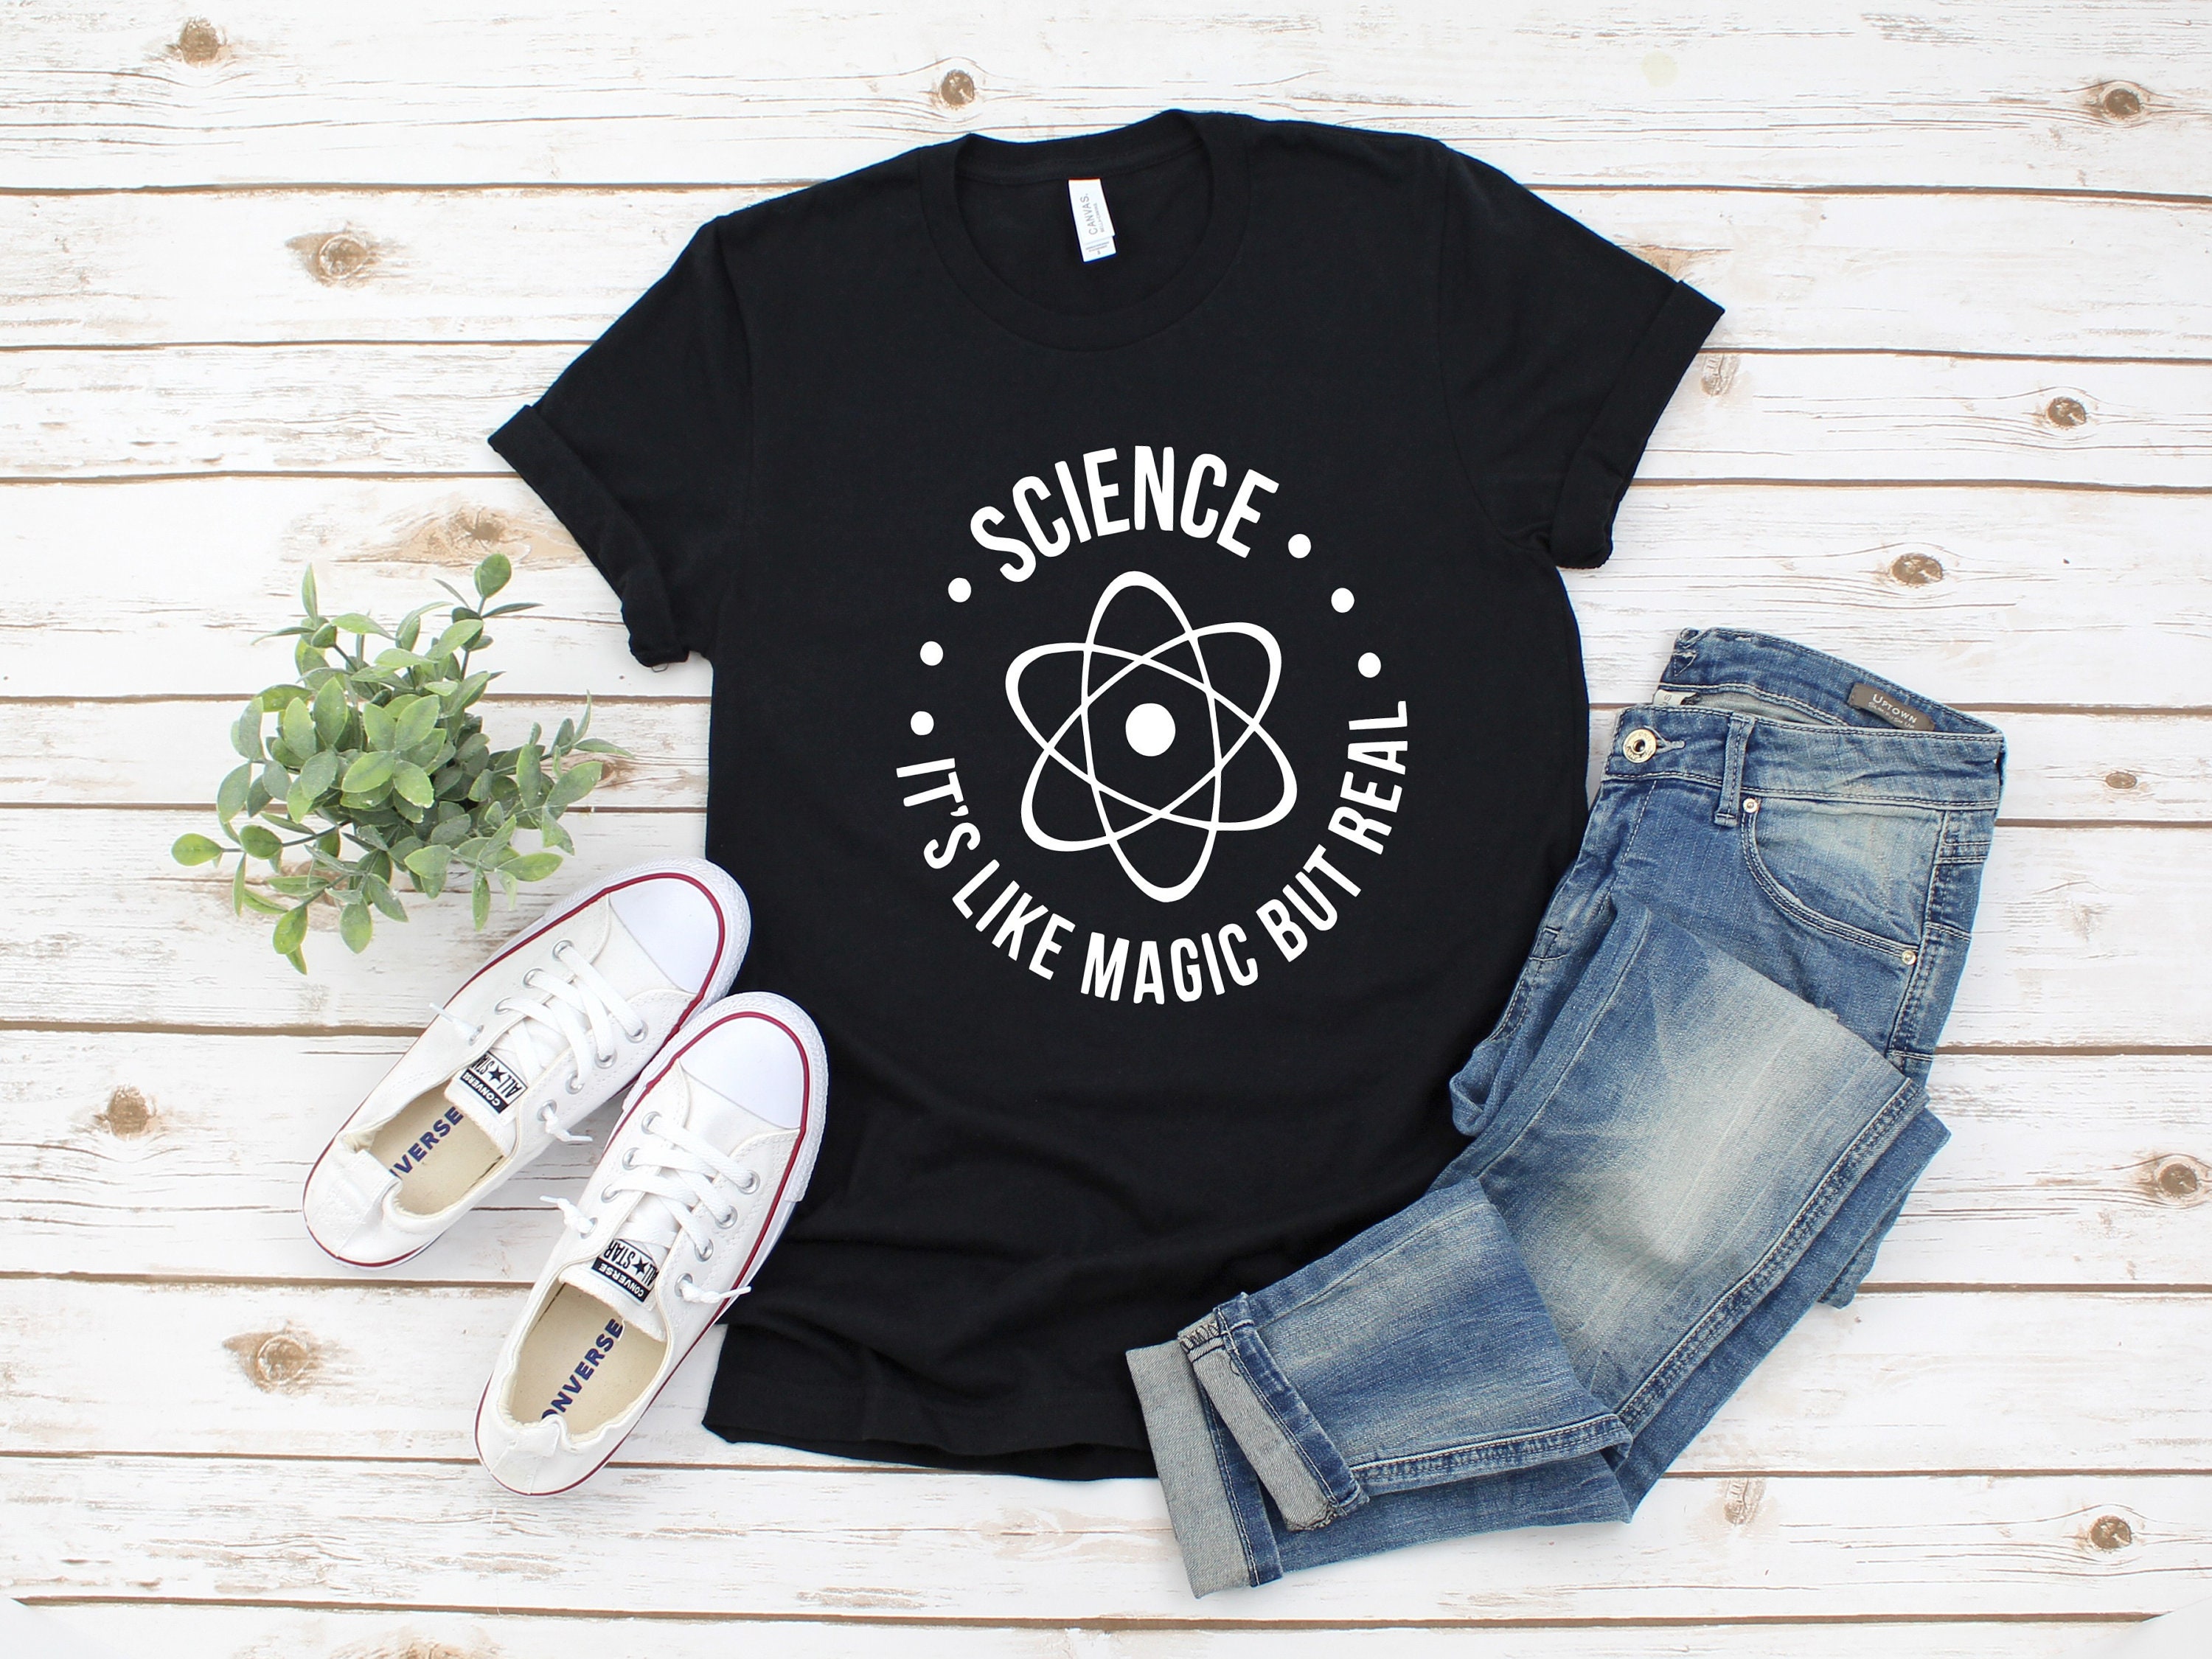 Discover Science Shirt, It's Like Magic But Real Shirt, Science Lover Shirt, Geek Shirt, Nerd Shirt, Sarcastic, For Men, For Women, Gift For Hers